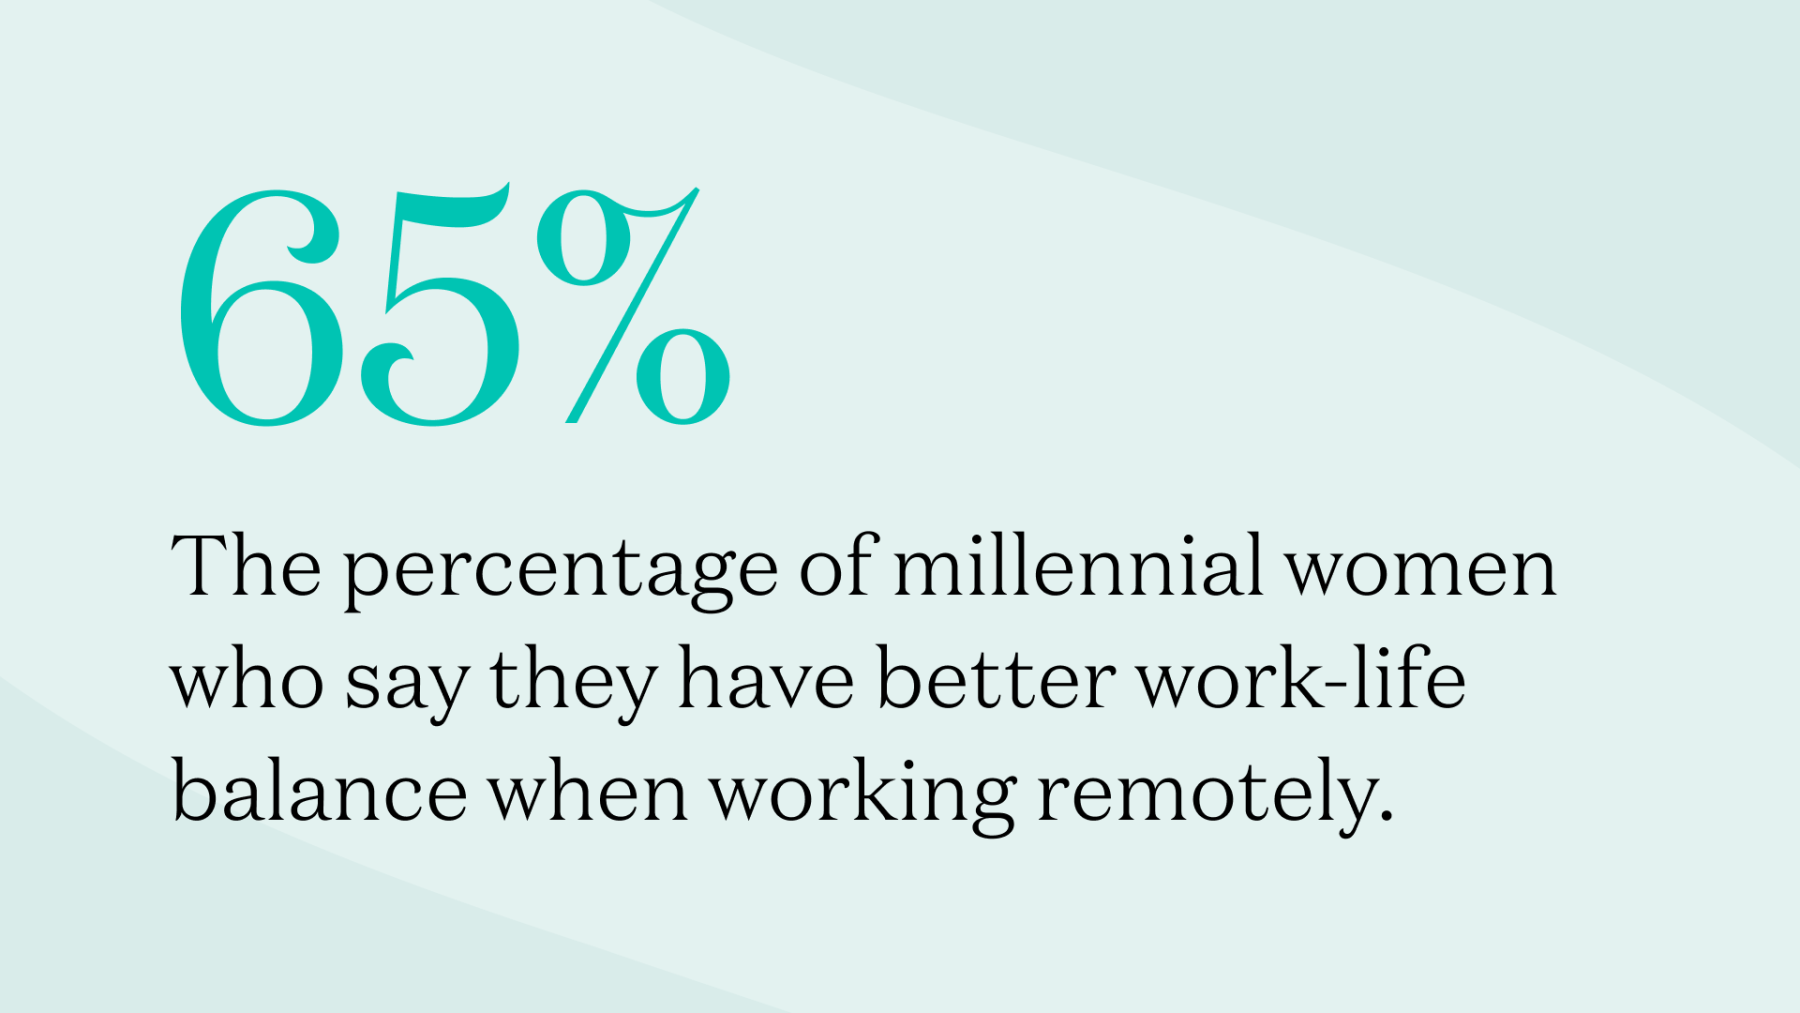 65%: The percentage of millennial women who say they have better work-life balance when working remotely.